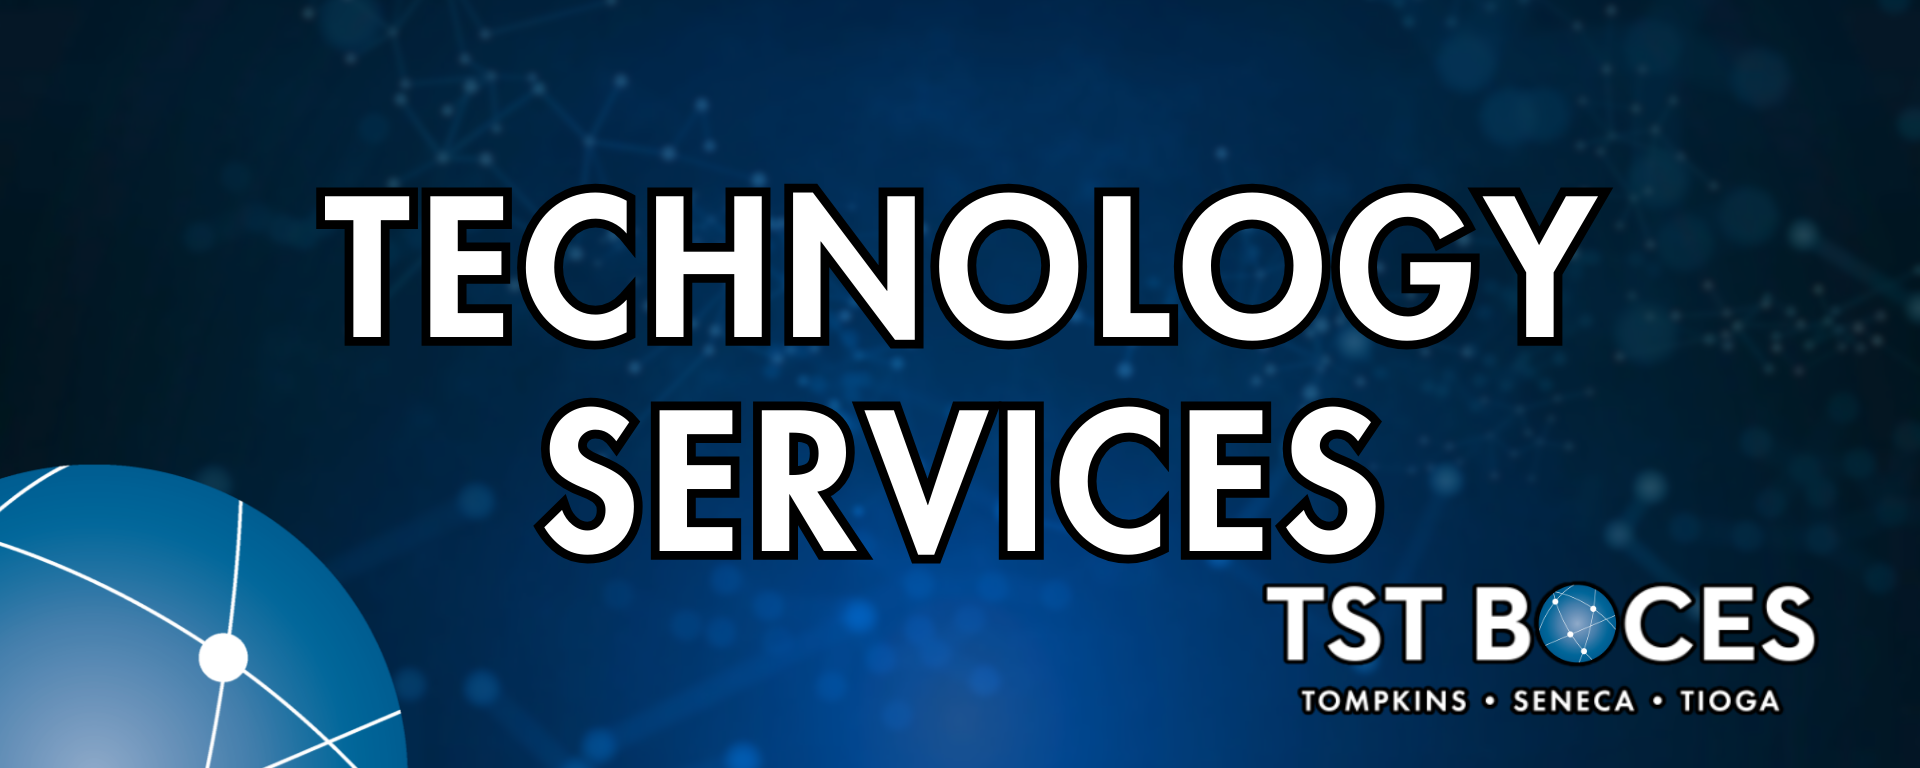 Technology Services Banner